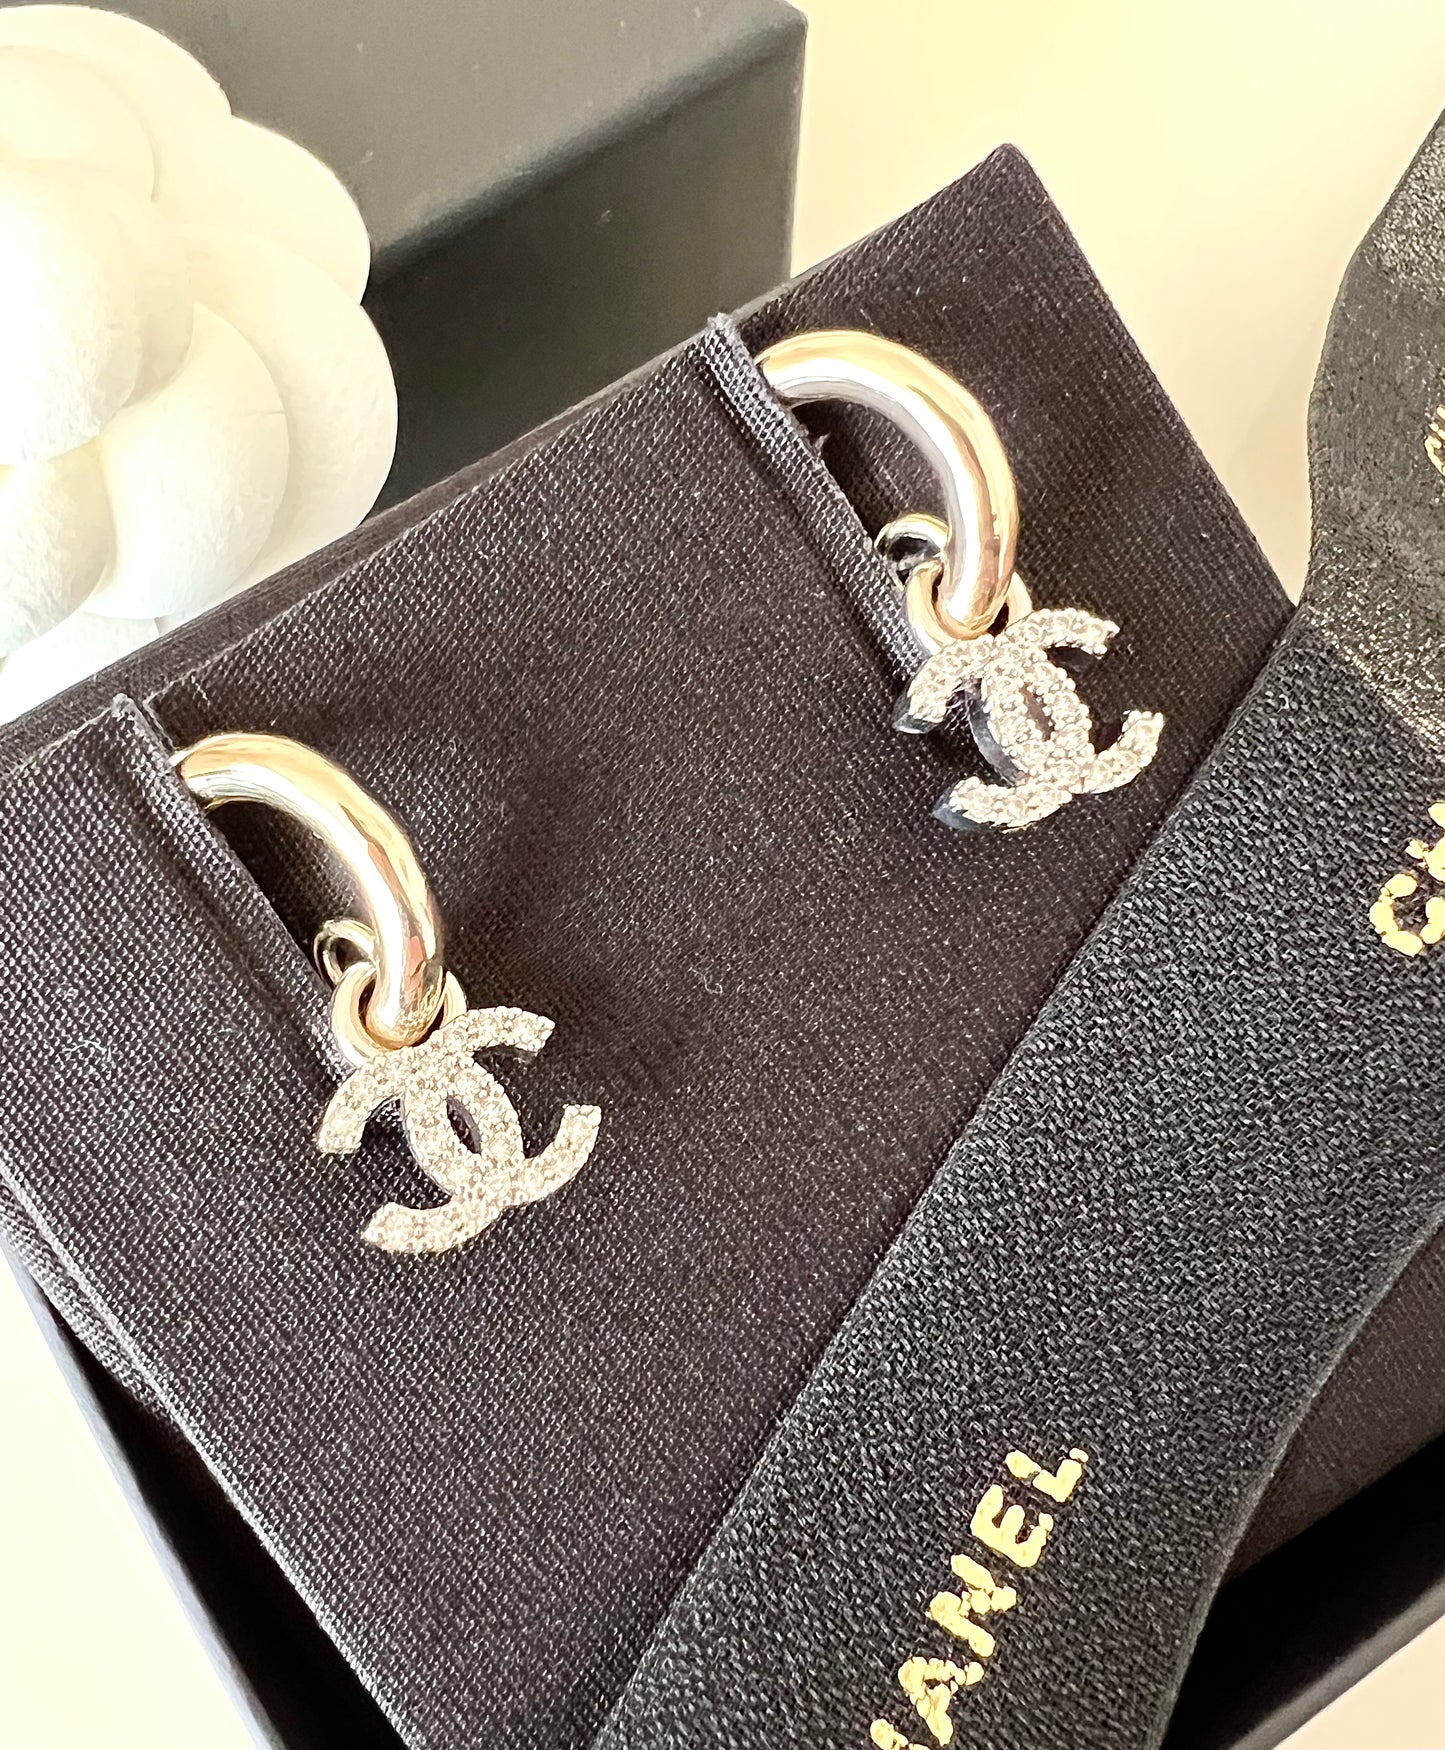 CHANEL Baroque Large CC Dangle Stud Earrings Gold Hardware – AYAINLOVE  CURATED LUXURIES